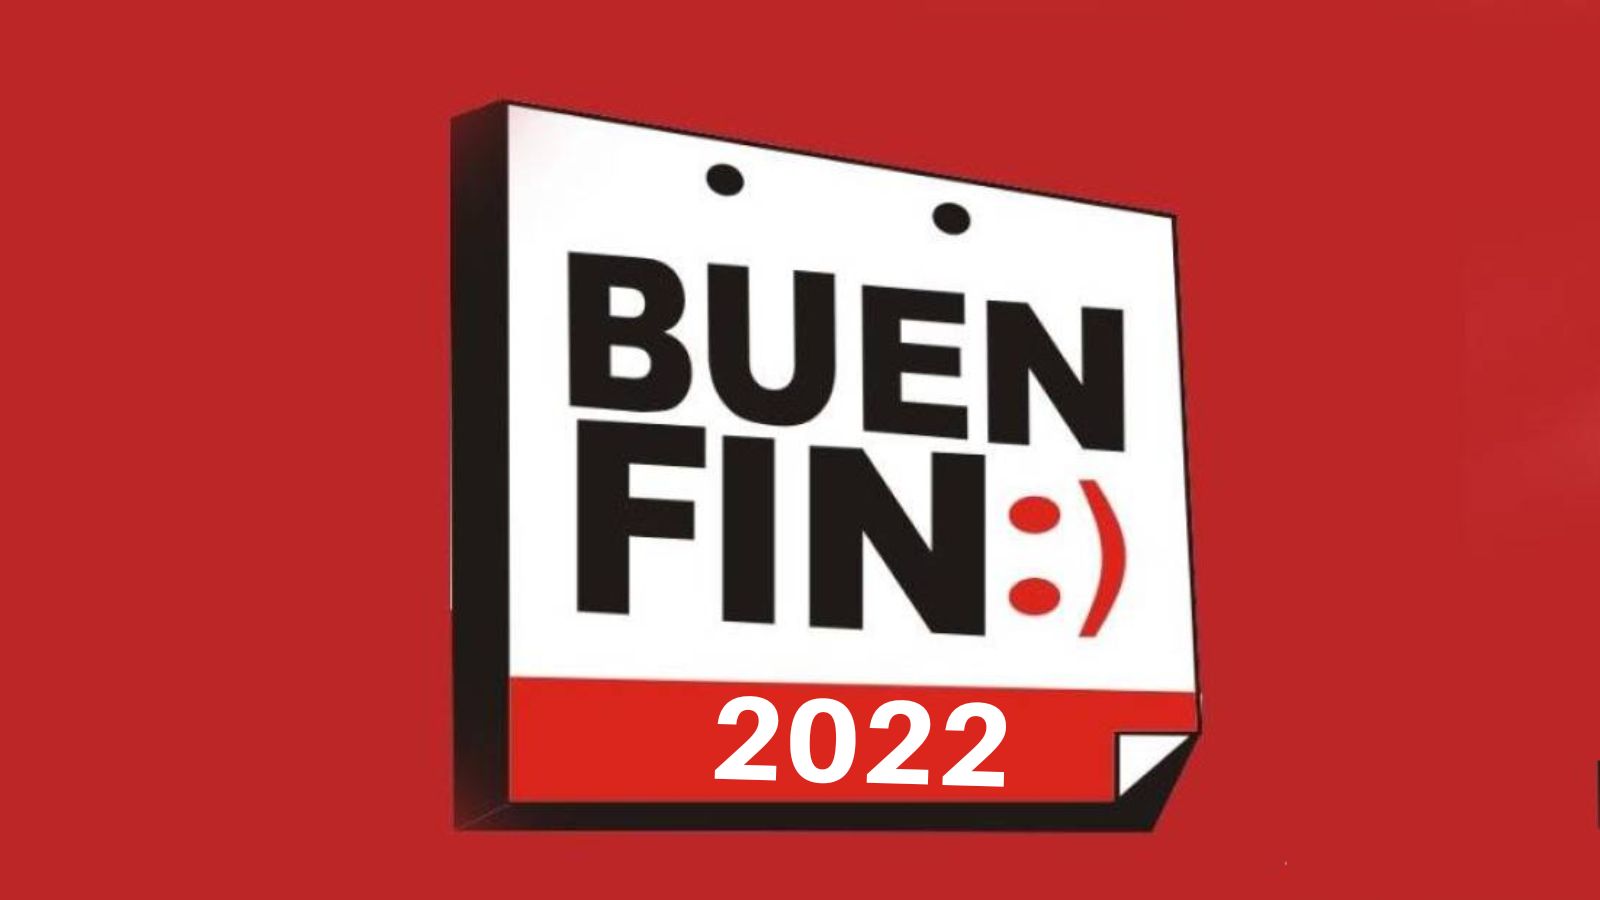 Buen Fin 2022 everything you need to know The Yucatan Times